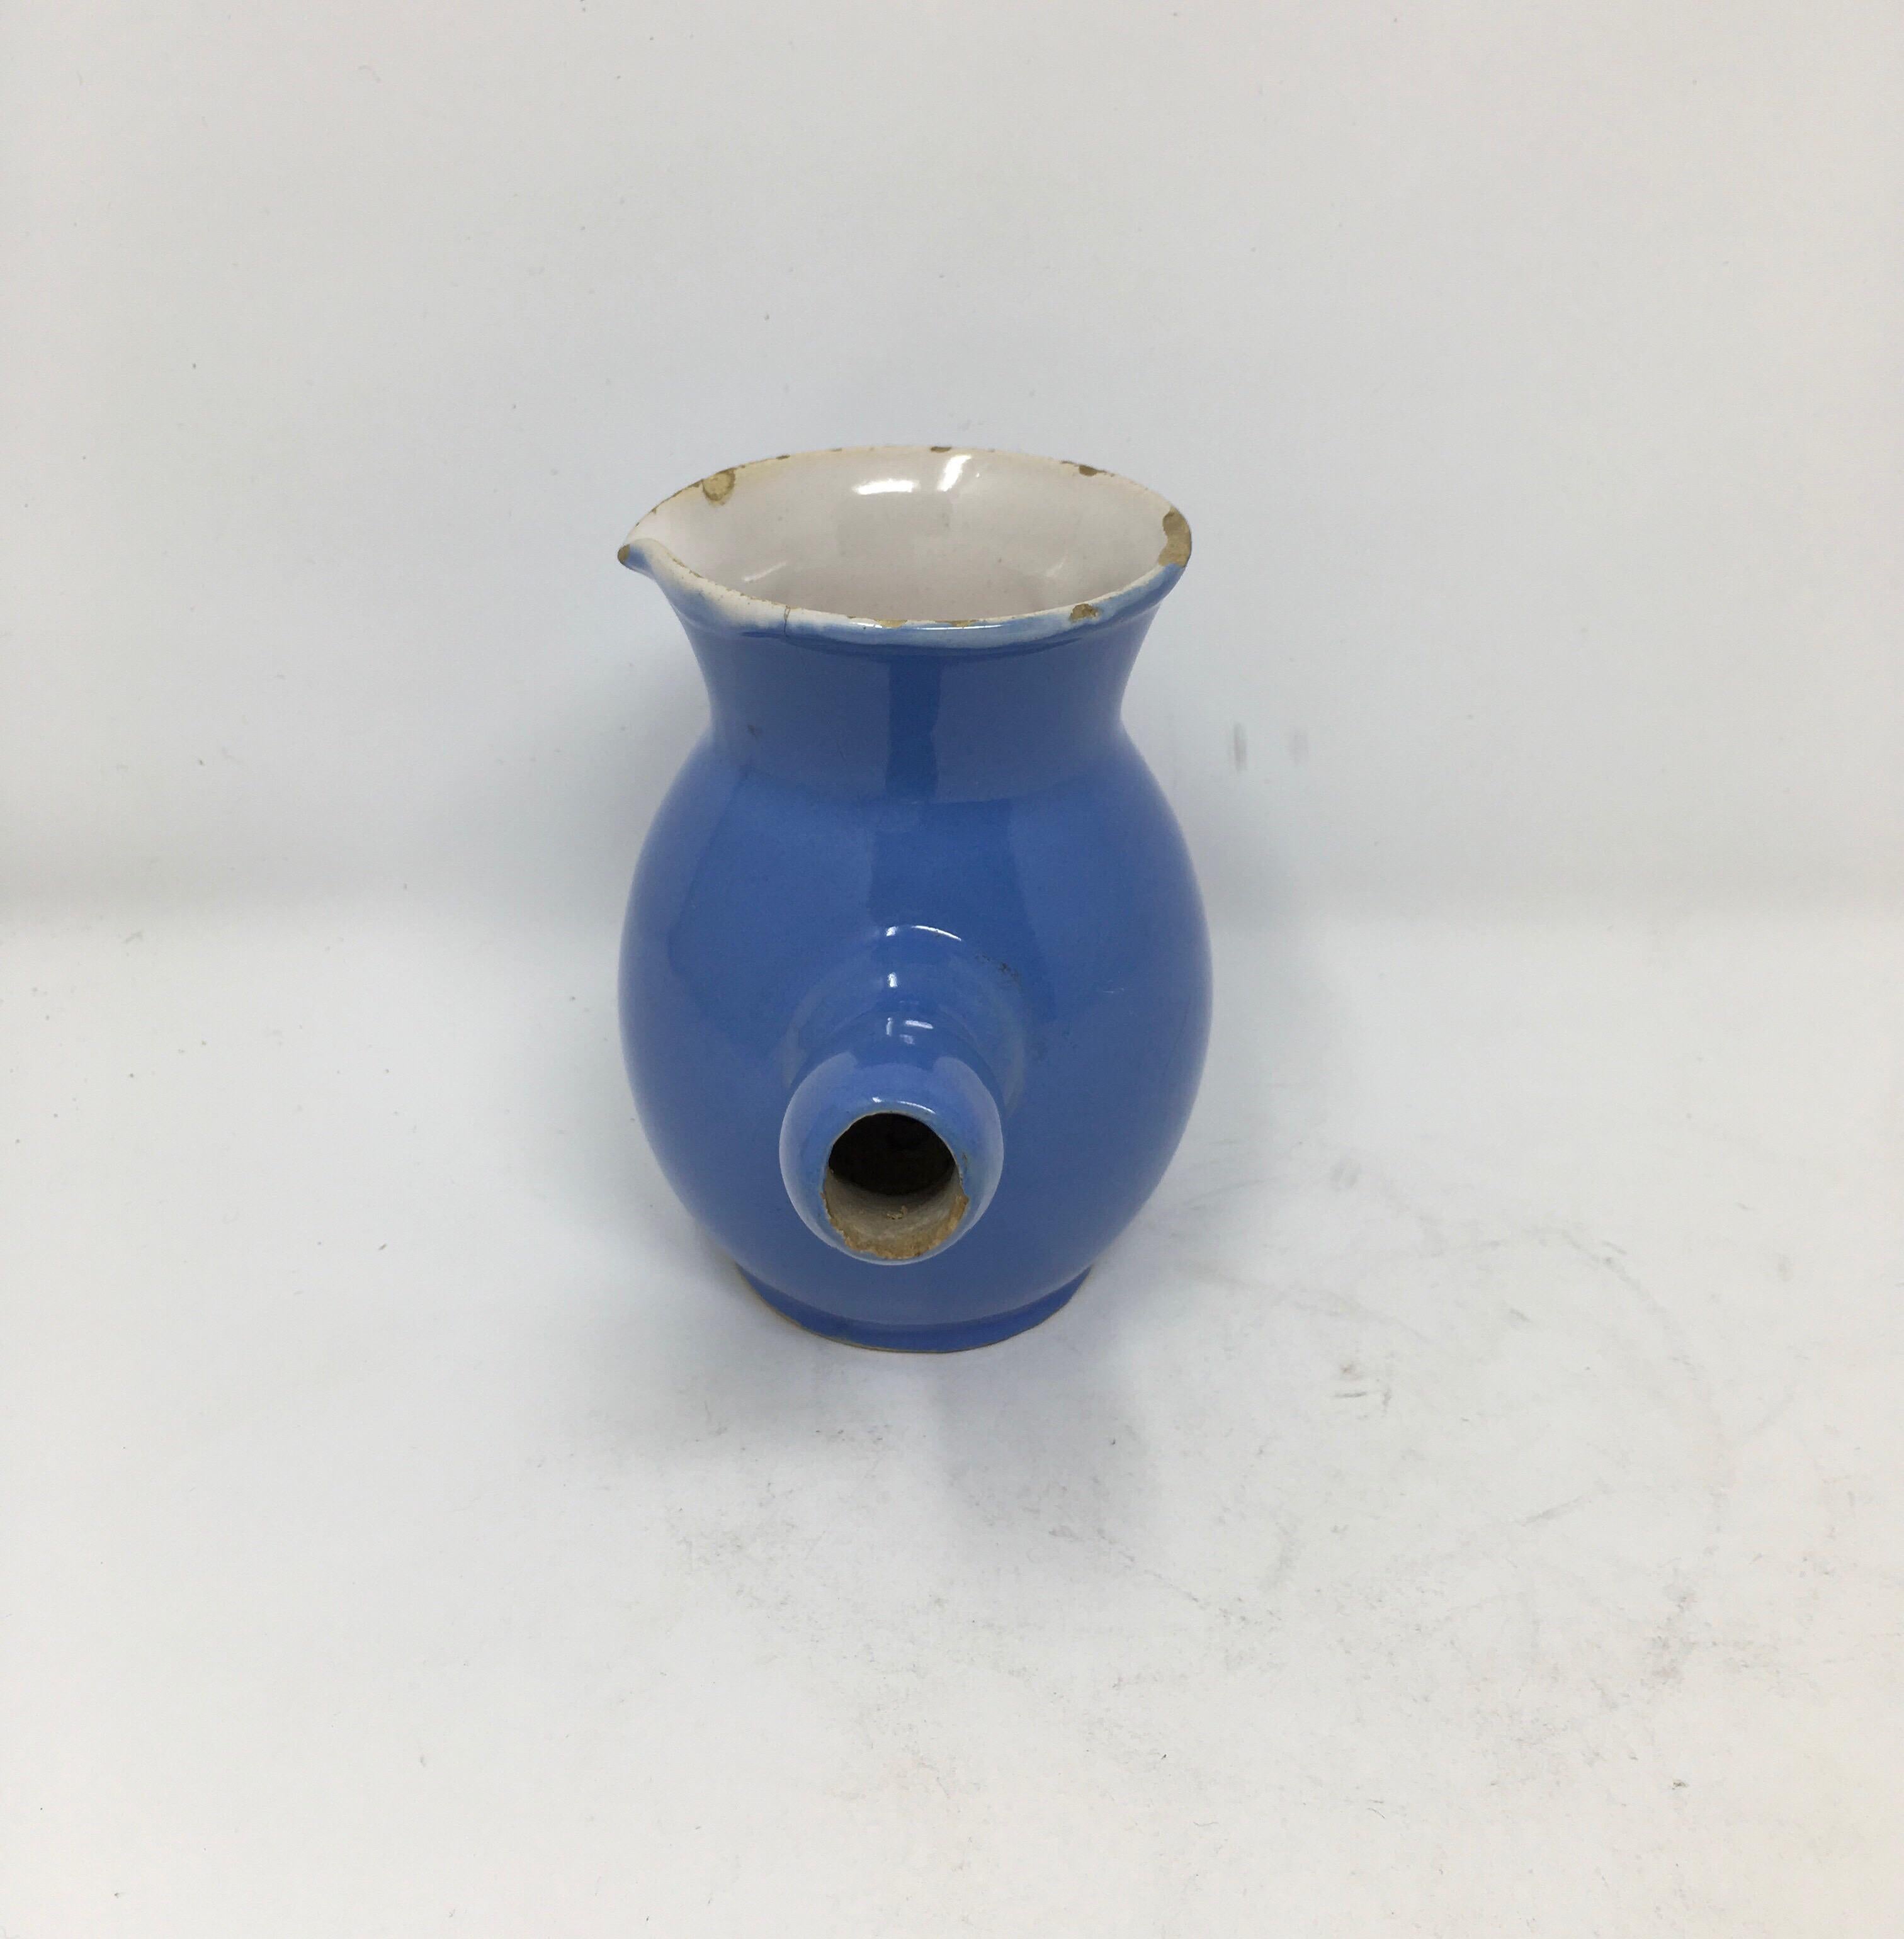 Found in the South of France, this hot chocolate pot was popularized in France in the 1800s. It features a pottery construction that retains heat for one hot serving after another. Covered in a blue glaze, from the South West of France, it is